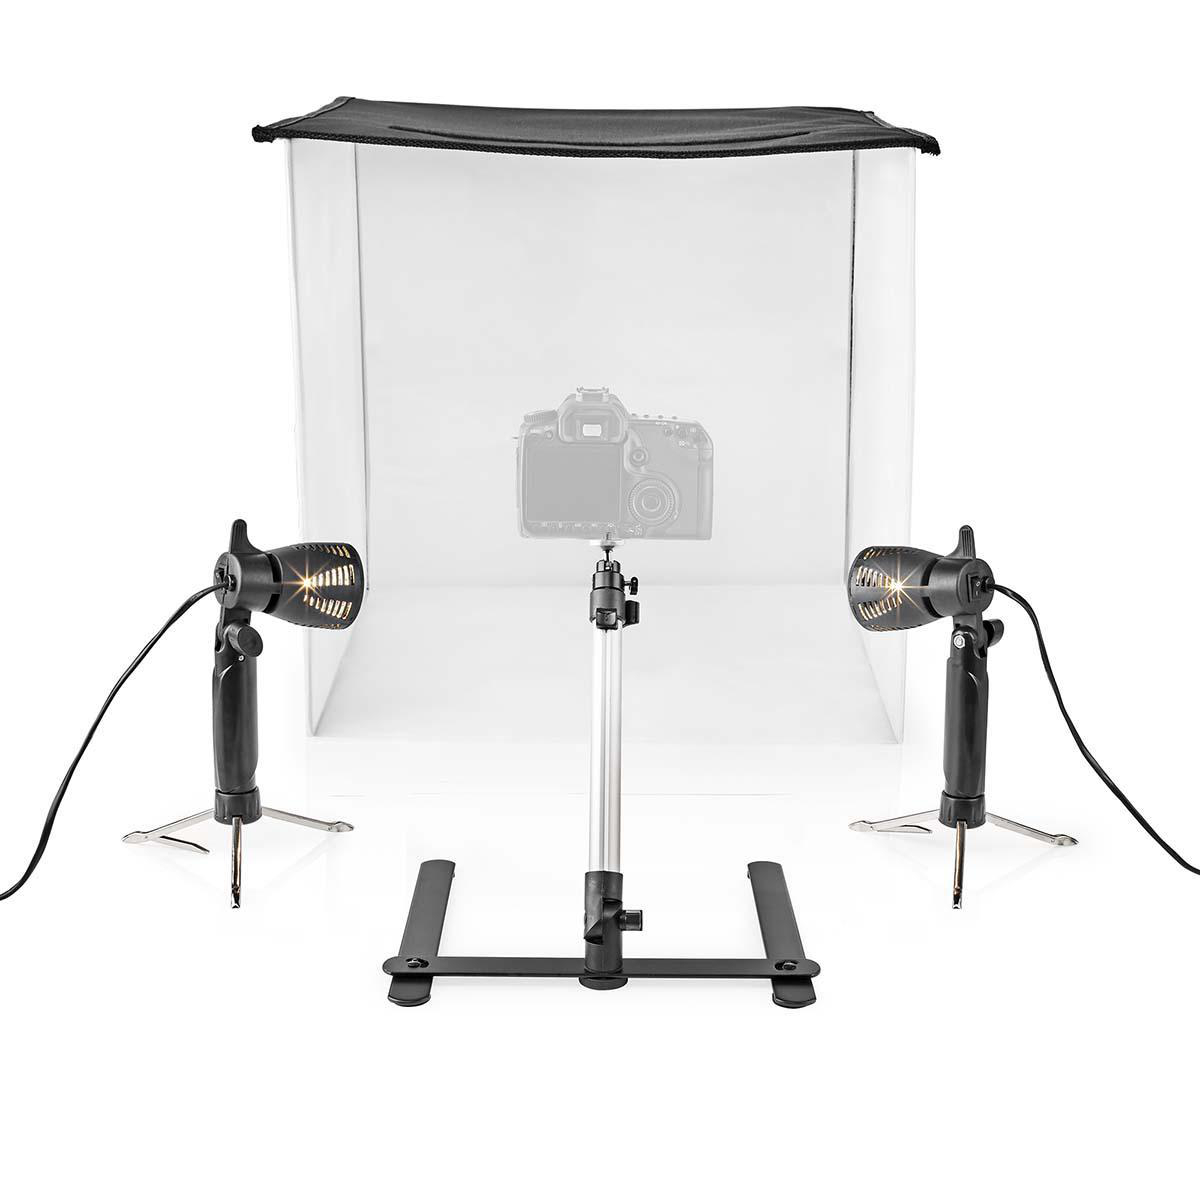 Portable Photo Studio Kit | 400 lm | Foldable | Backgrounds included |  Travel bag included